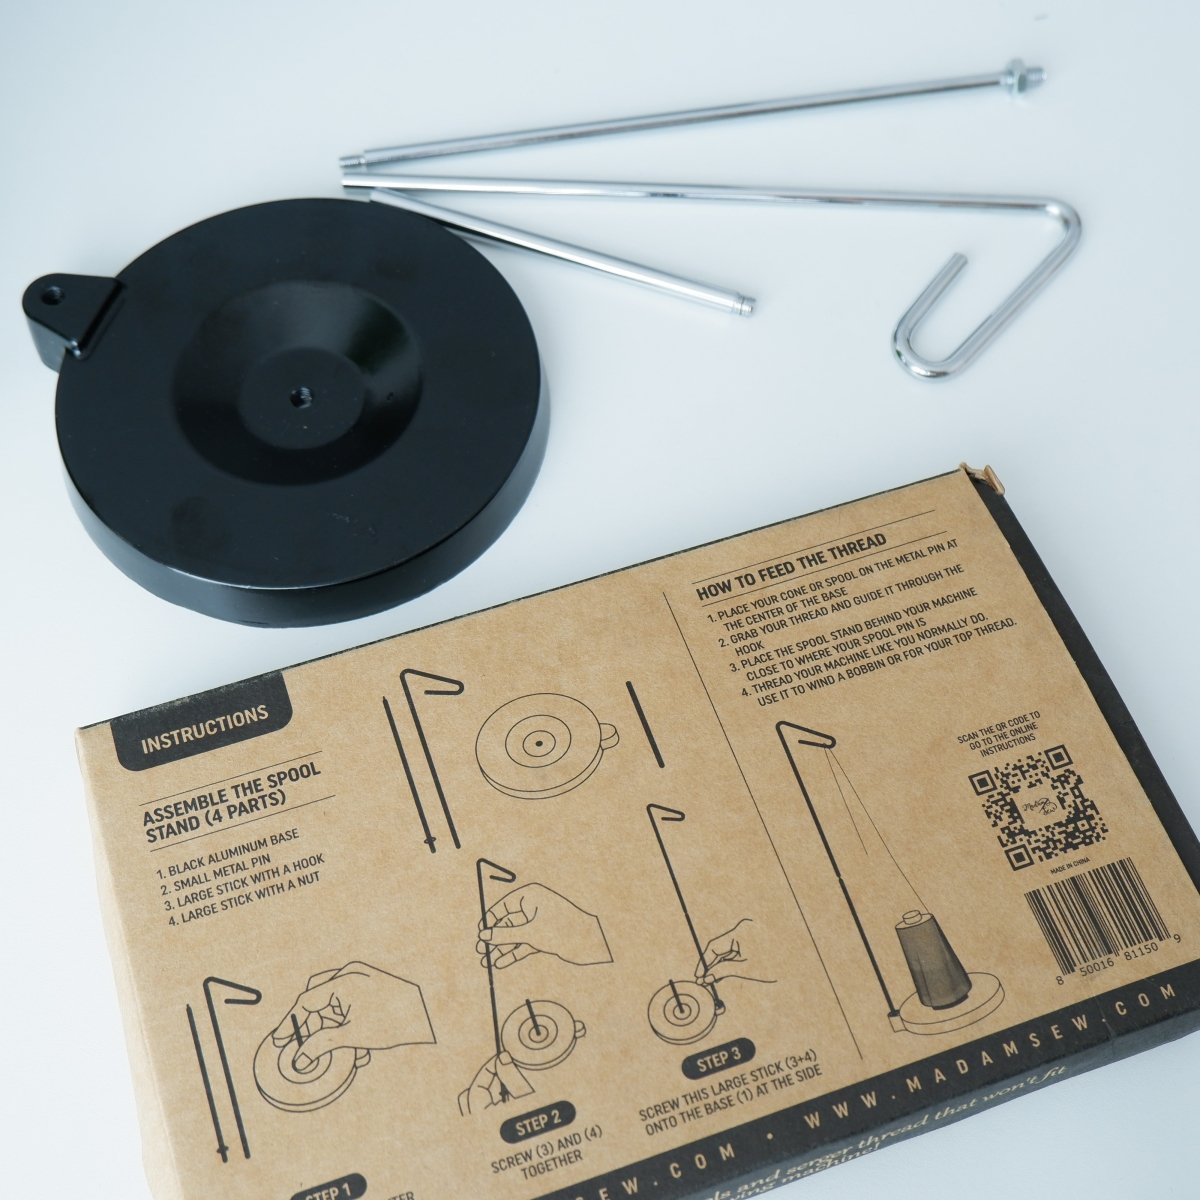 Thread Stand for Sewing Machine Cones and Spools with packaging and instructions